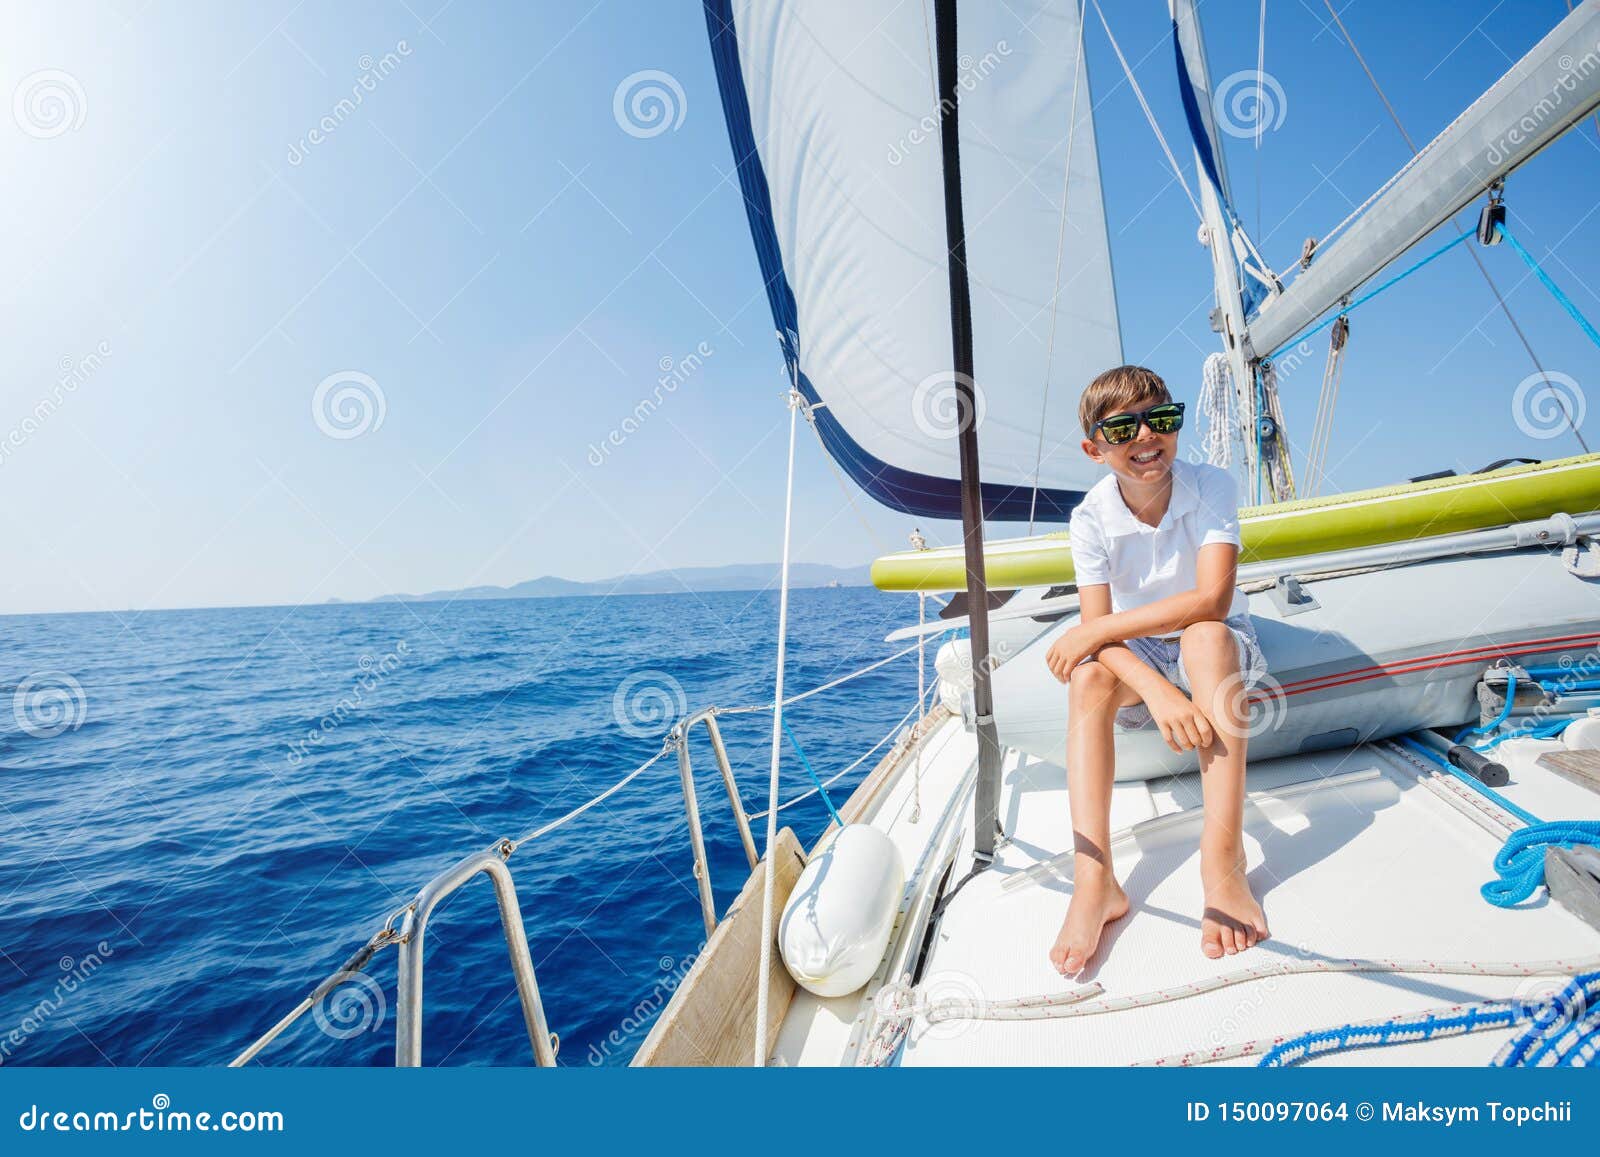 little boy on board of sailing yacht on summer cruise. travel adventure, yachting with child on family vacation.